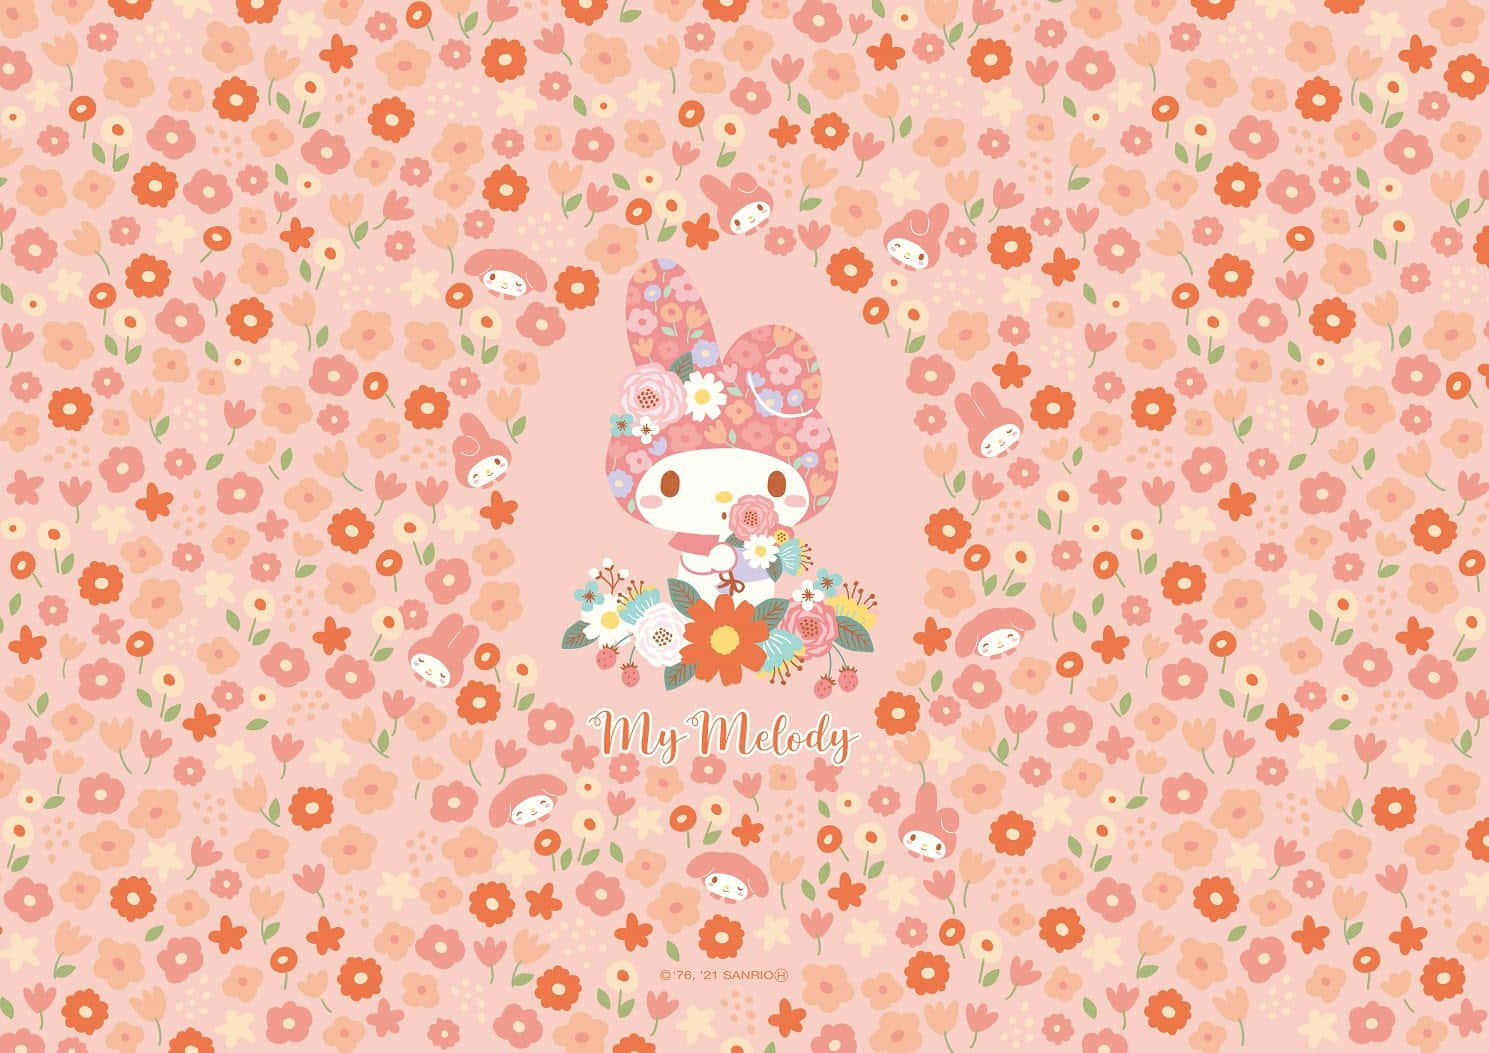 My Melody is ready for an adventure!